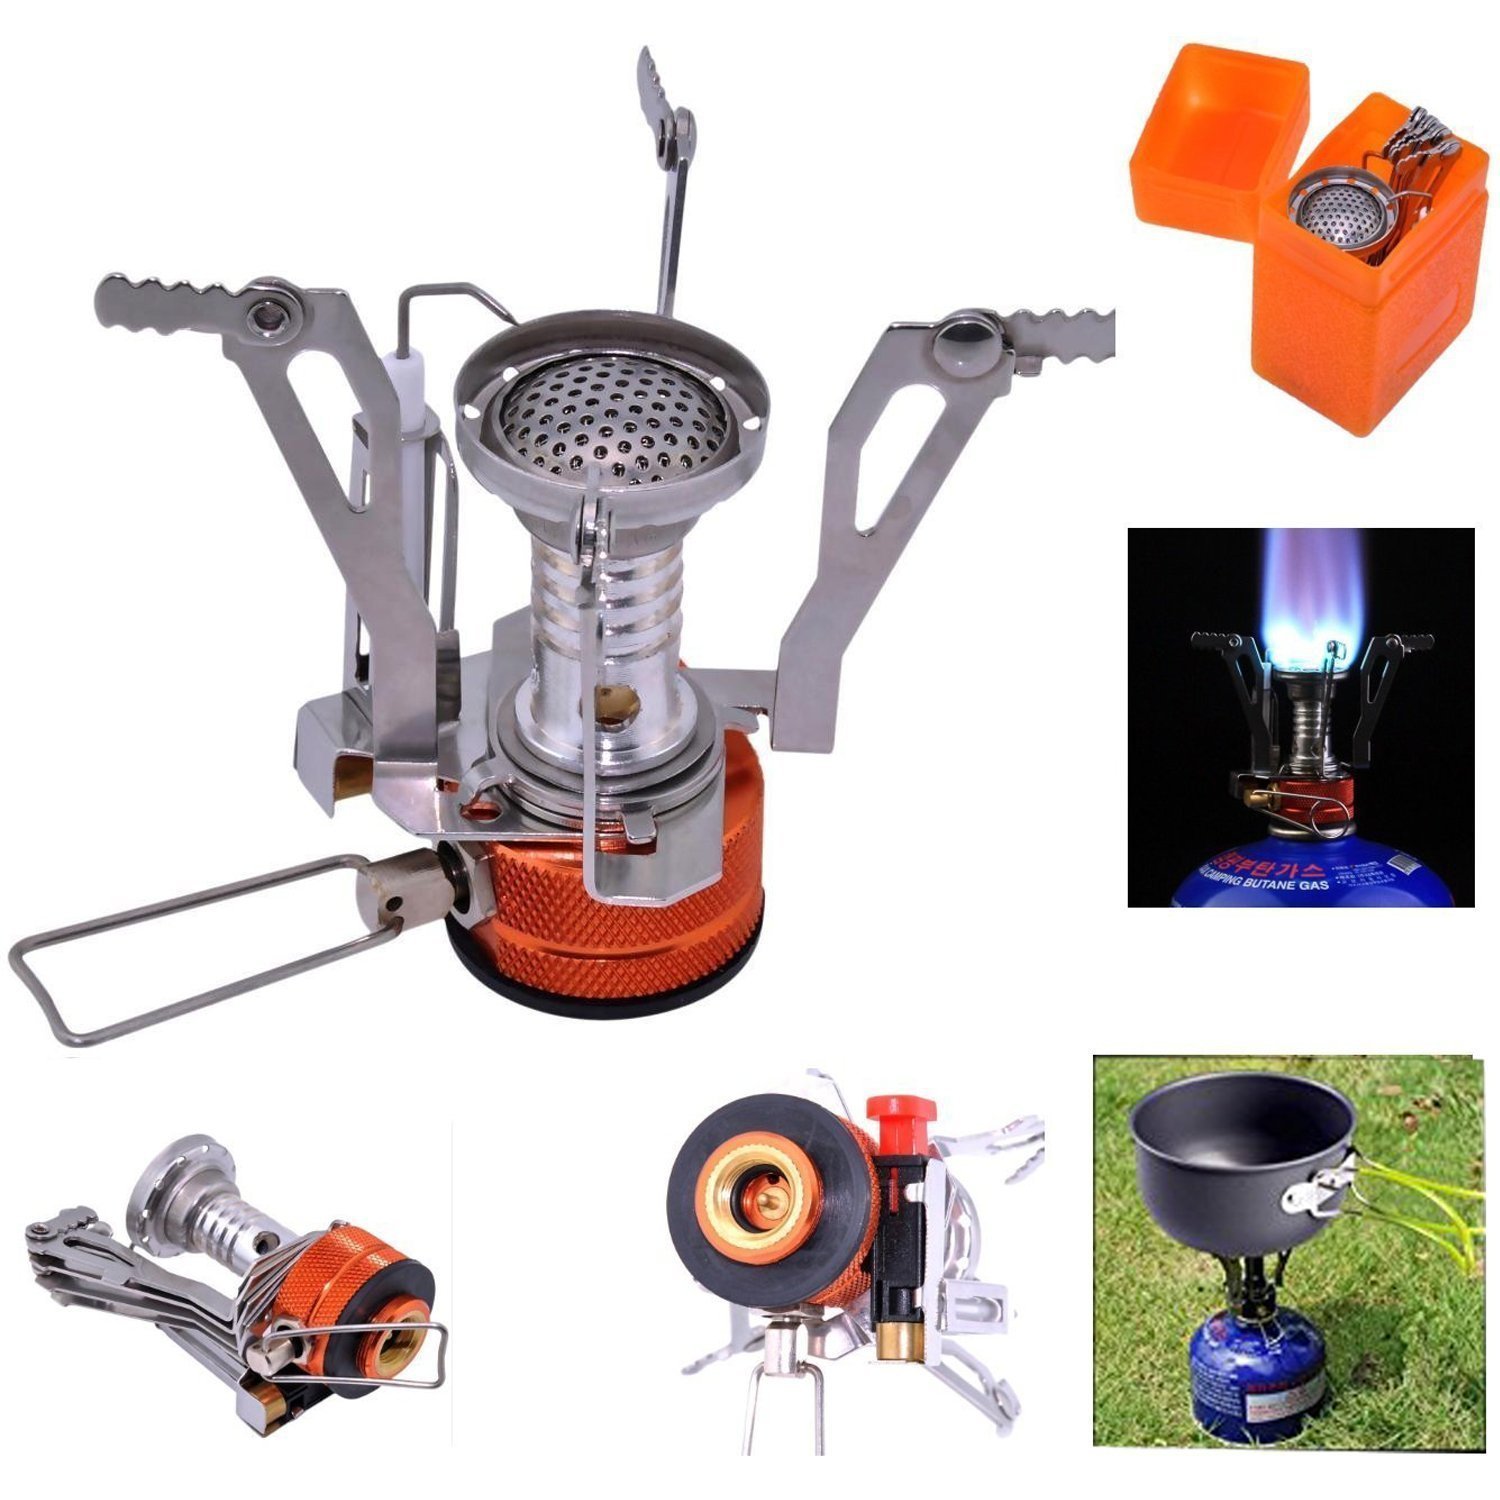 GL Portable Light Outdoor Camping Cookware Sets Gas Stove with Foldable Tableware Pan Dishwashing Sponge Hiking Picnic Tool 22